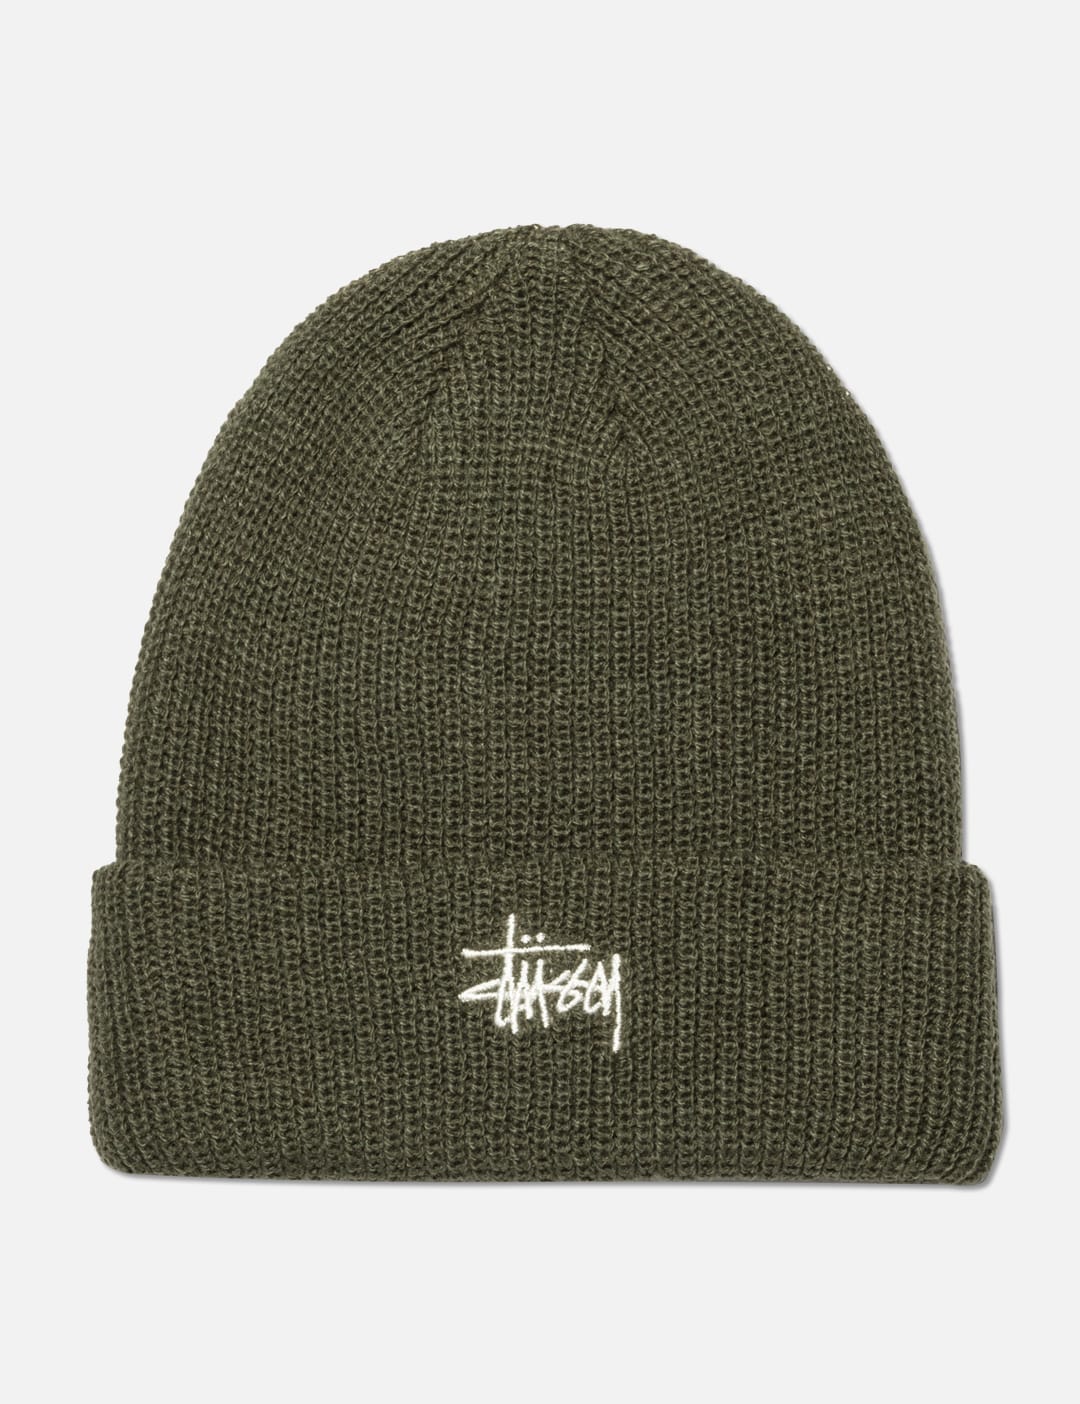 Butter Goods - Chain Link Beanie | HBX - Globally Curated Fashion 